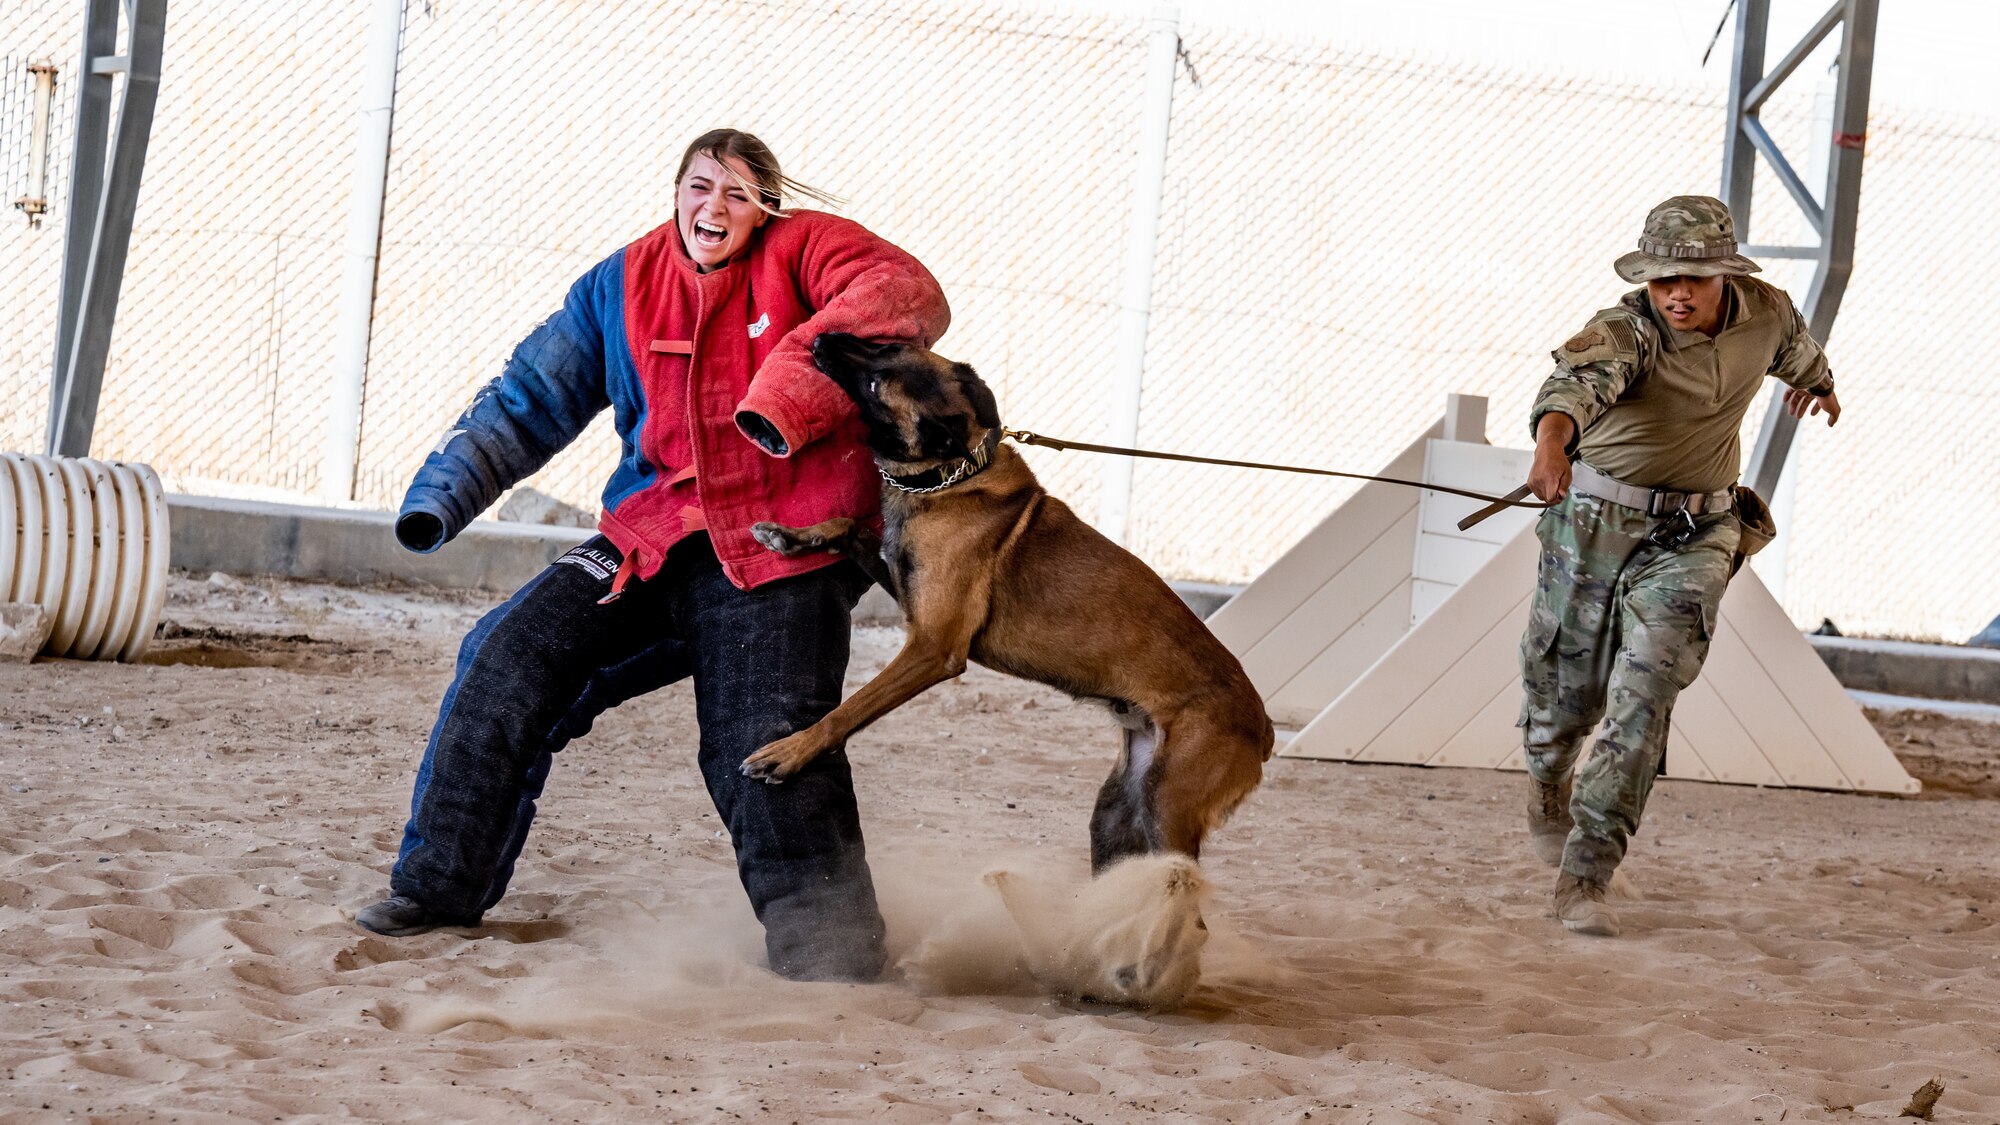 U.S. Air Force Senior Airman Christian Yadao, 386th Expeditionary Security Forces Squadron military working dog handler, commands MWD Betyar to take down Airman 1st Class Brayden Ash, 386th ESFS member, during bite training at Ali Al Salem Air Base, Kuwait, July 26, 2023. The MWD teams here train in tandem every day to accomplish their mission of defending and improving the installation along with fostering partnerships between coalition forces. (U.S. Air Force photo by Staff Sgt. Kevin Long)